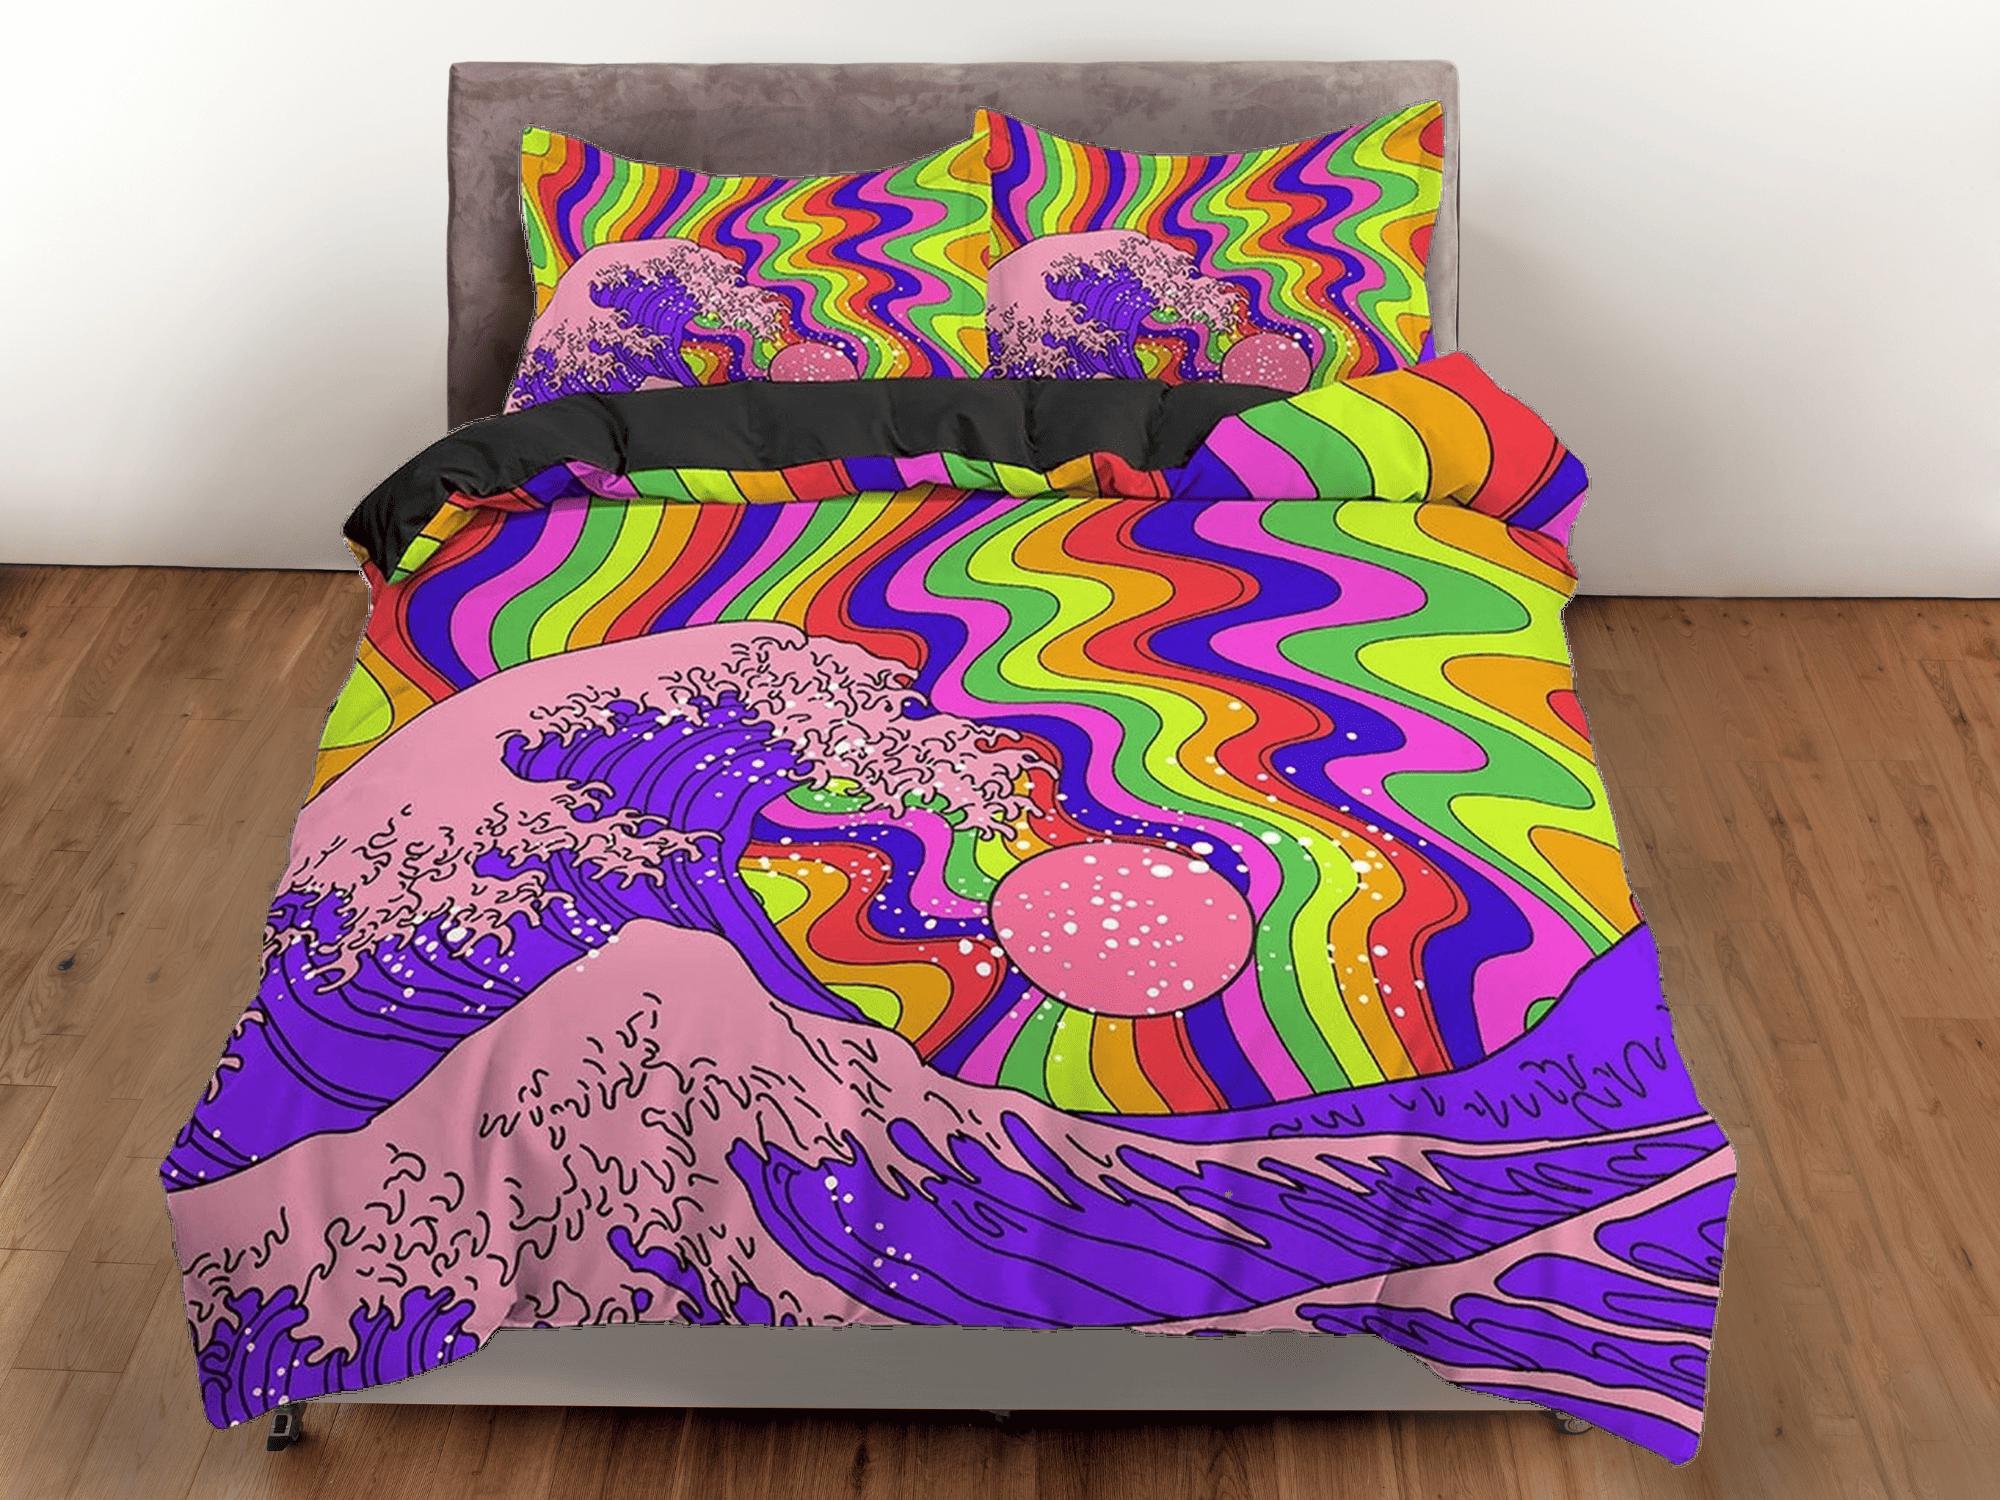 daintyduvet The Great Wave Bedding, Trippy Psychedelic Bedding Retro Vaporwave Hippie Bedding, Aesthetic Duvet Cover King Queen Full Twin Double Single